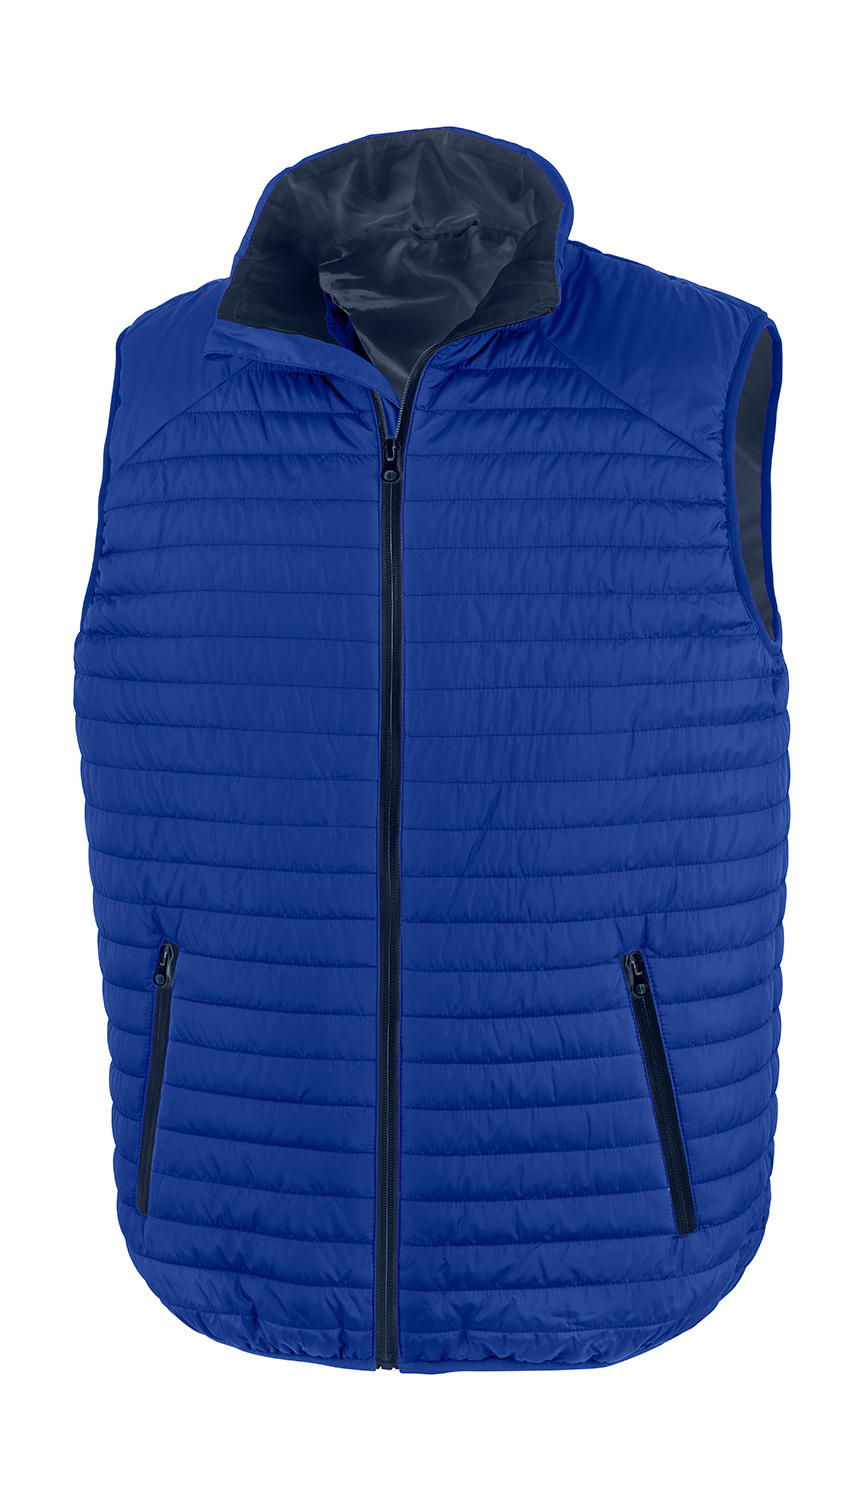  Thermoquilt Gilet in Farbe Royal/Navy